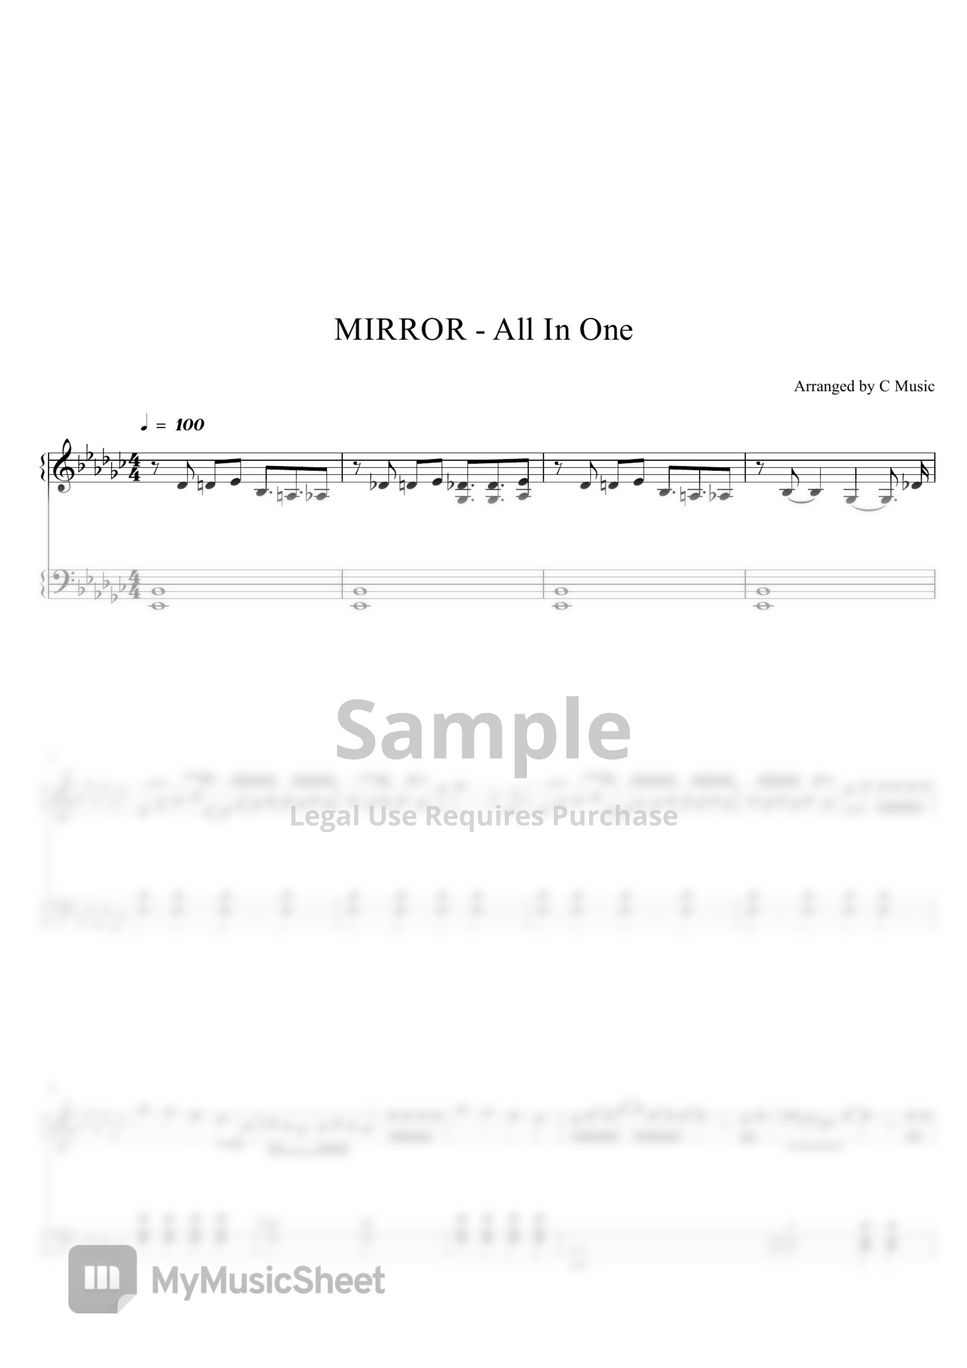 Mirror - All in One by C Music